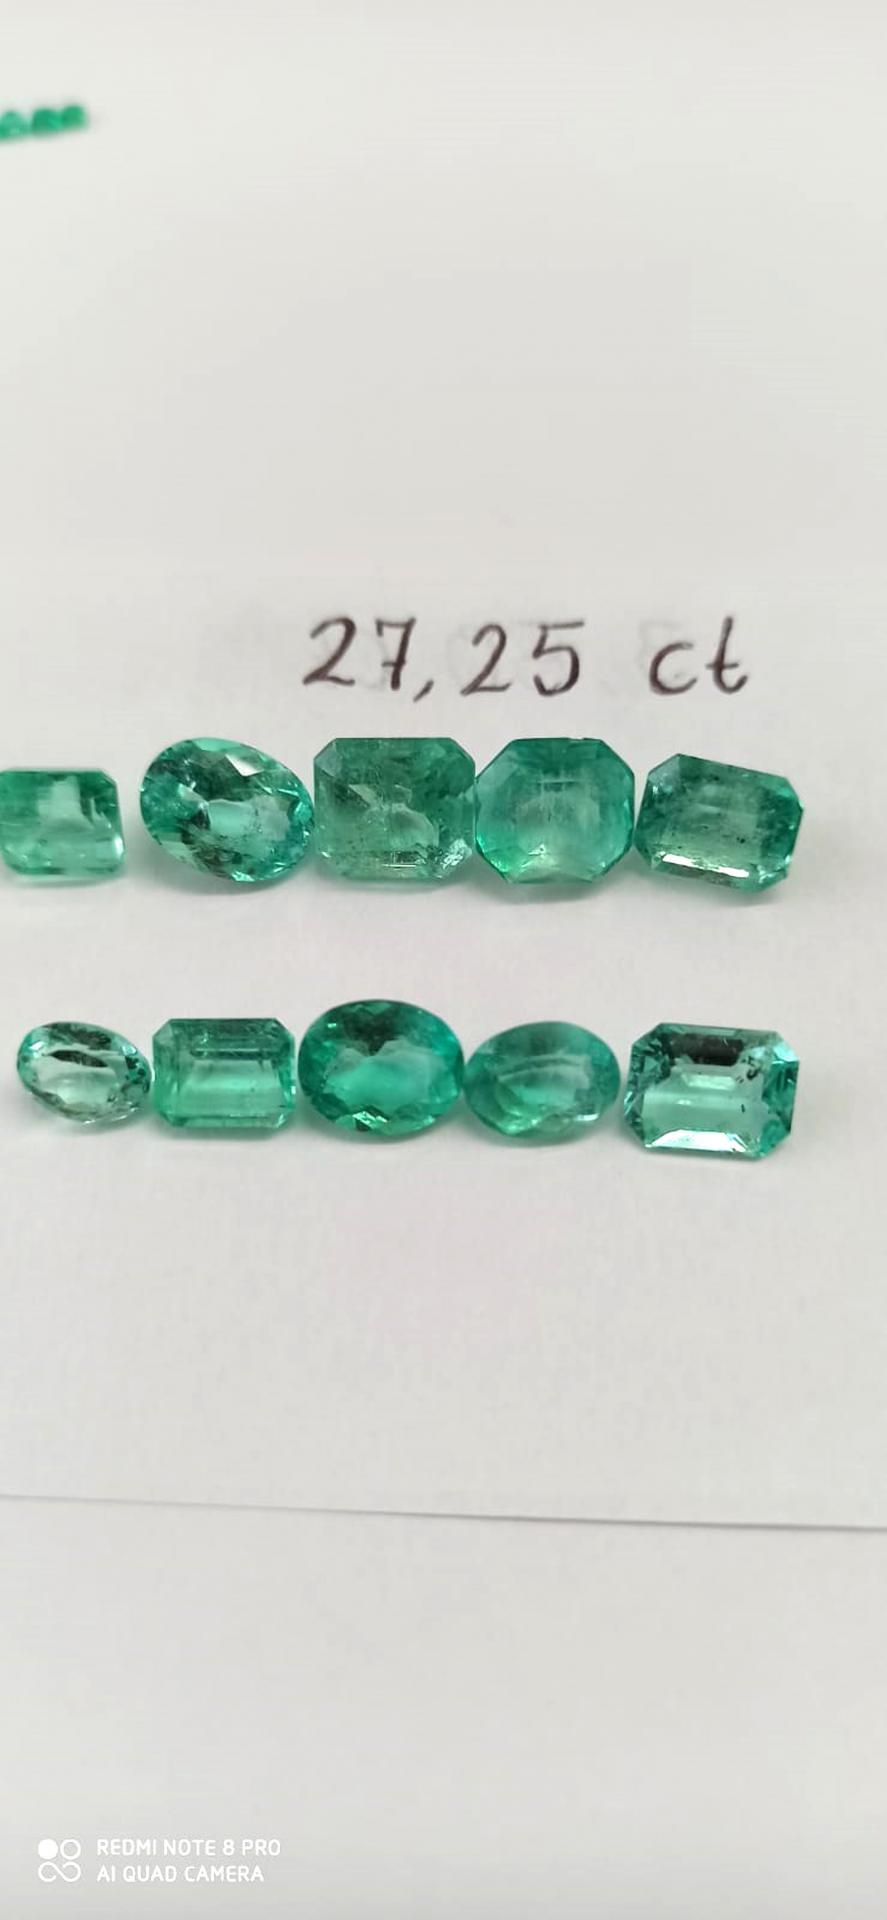 27.25 Ct. Colombian Emerald Lot 